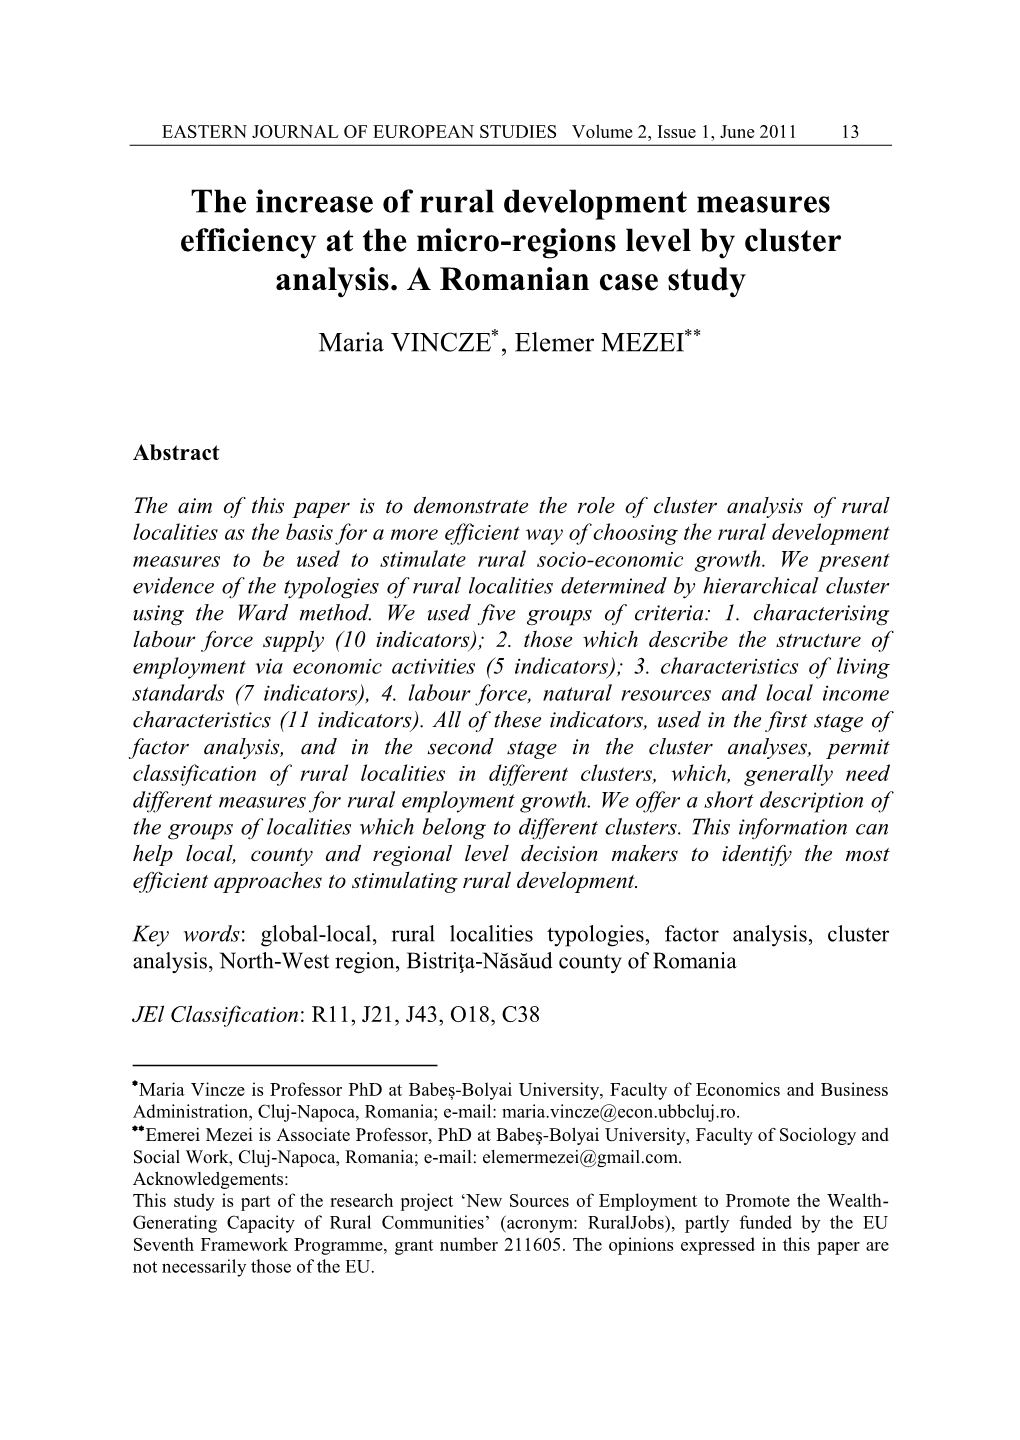 The Increase of Rural Development Measures Efficiency at the Micro-Regions Level by Cluster Analysis